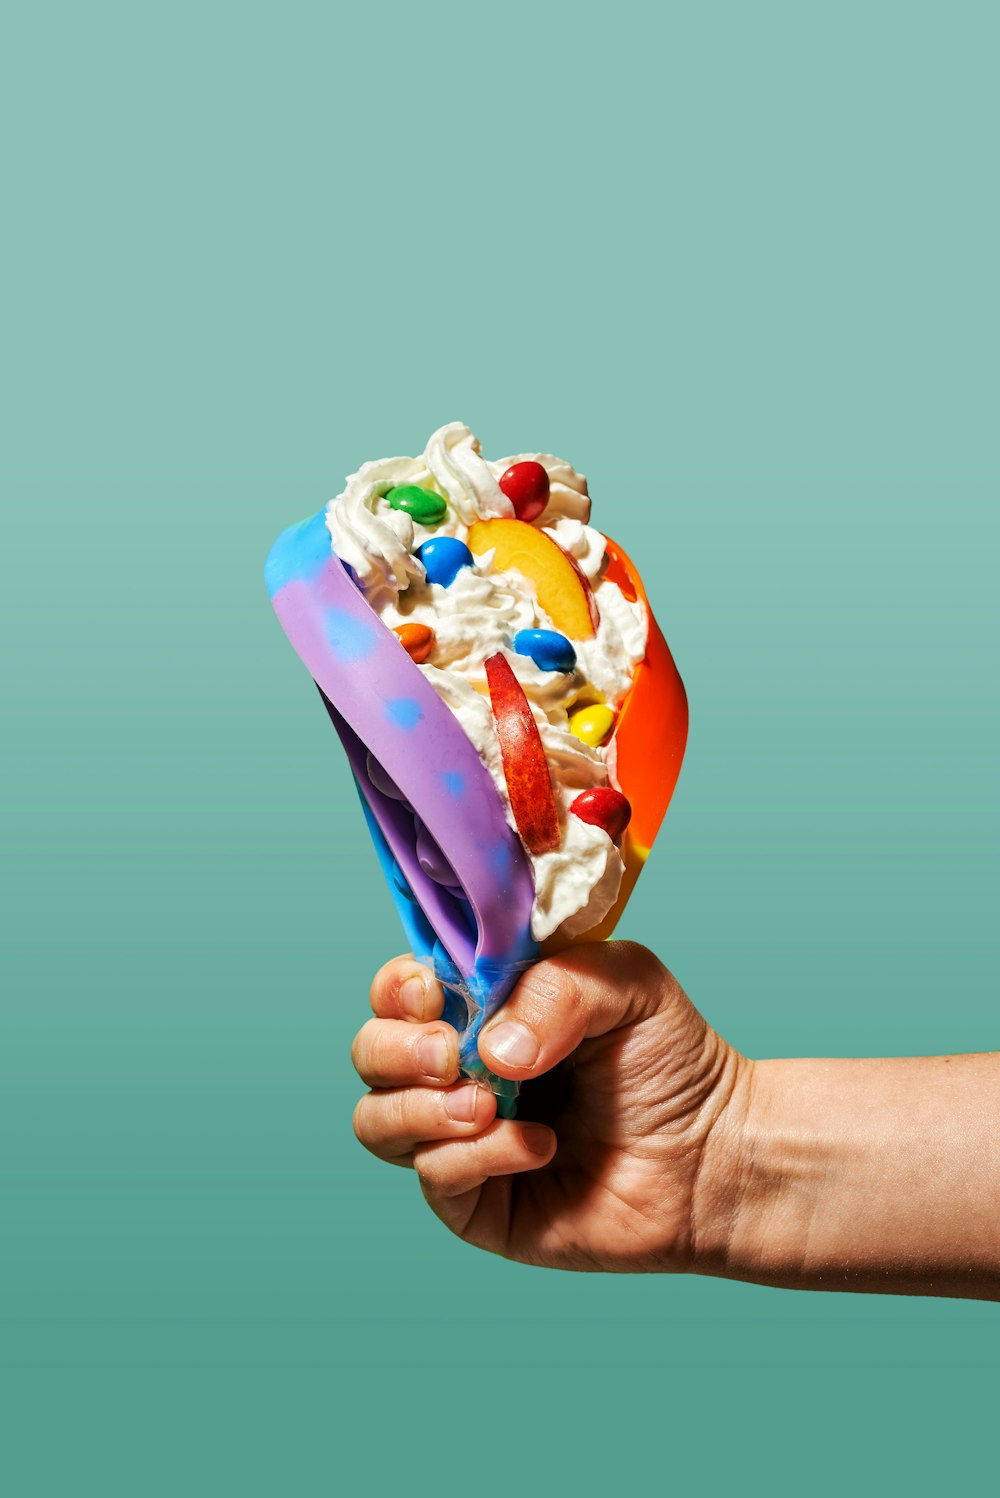 a hand holding a scoop of ice cream with colorful toppings